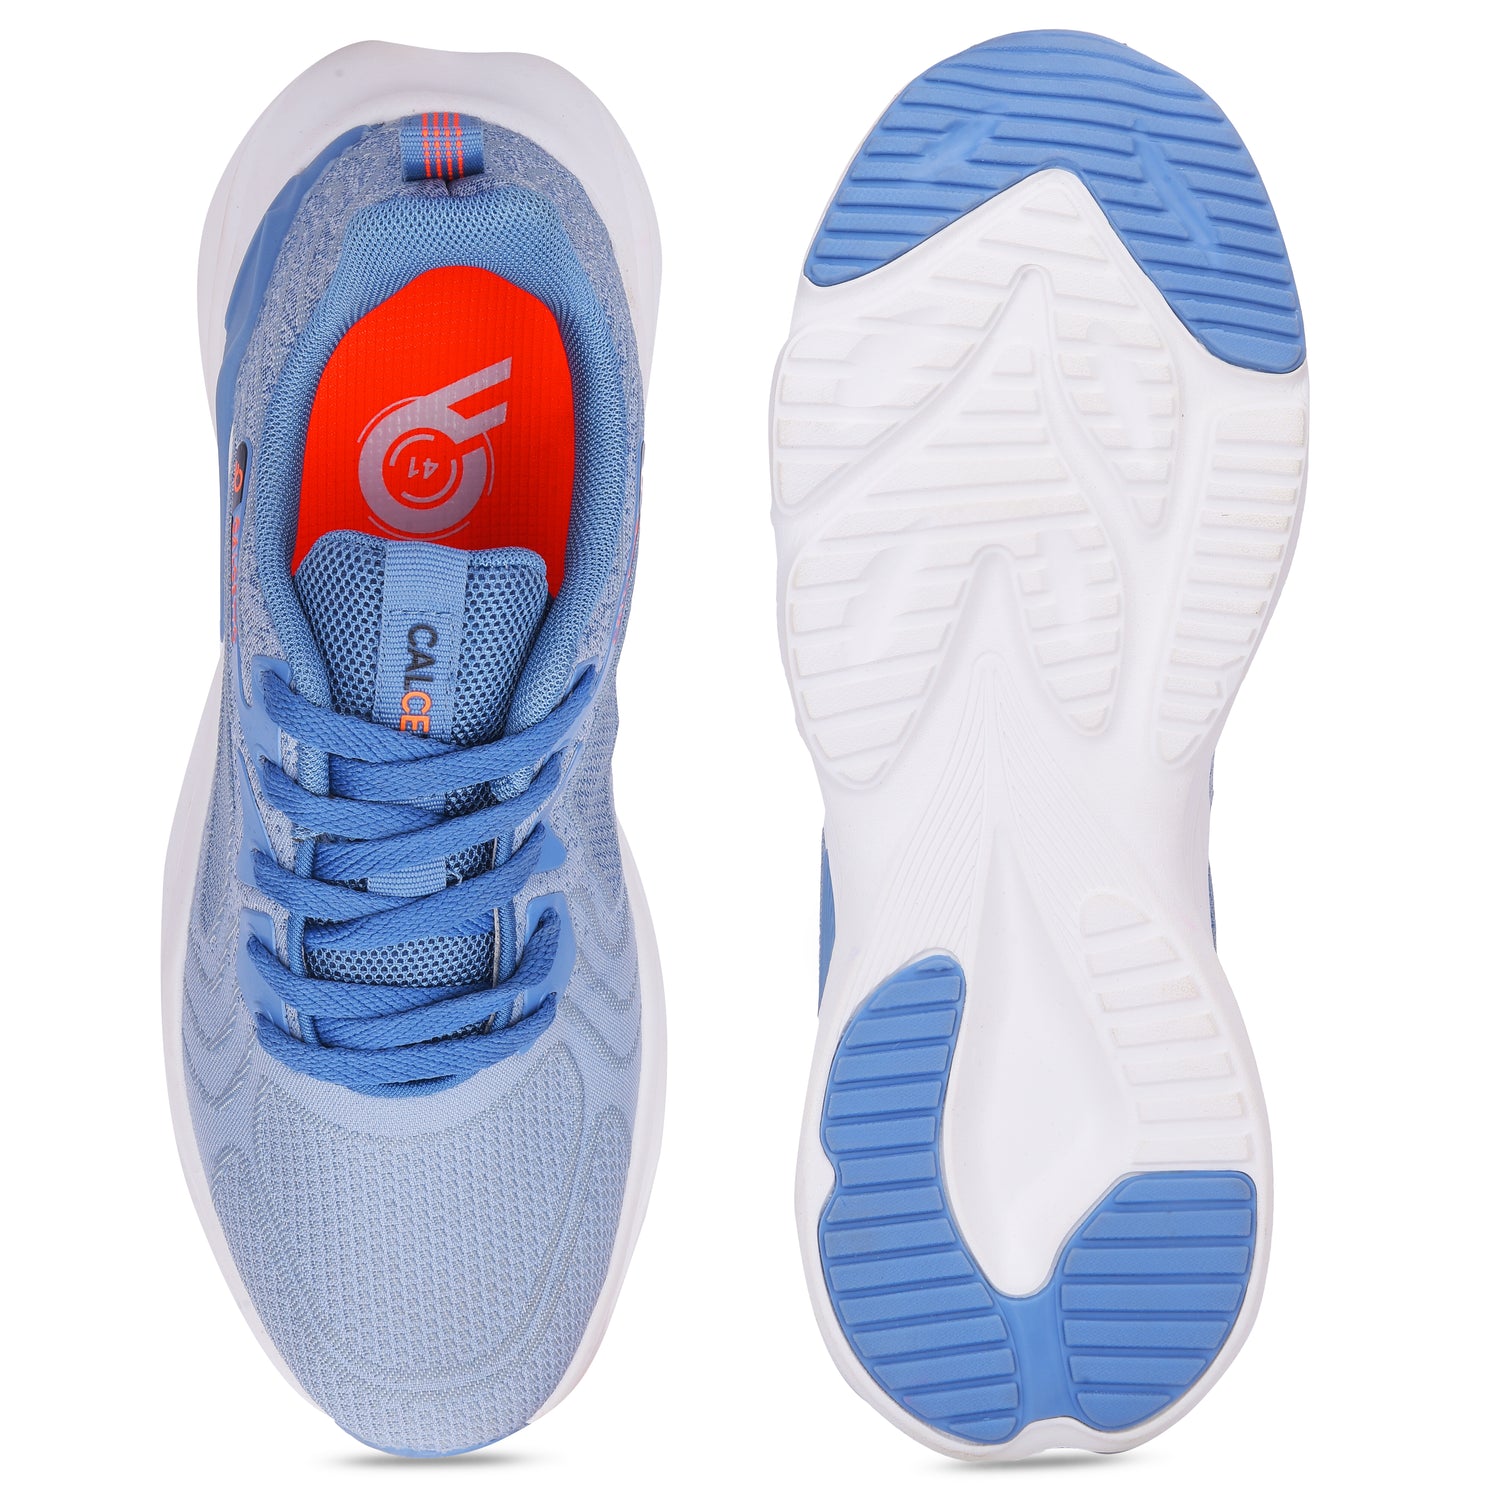 Calcetto CLT-0962 Sky Men Running Shoes